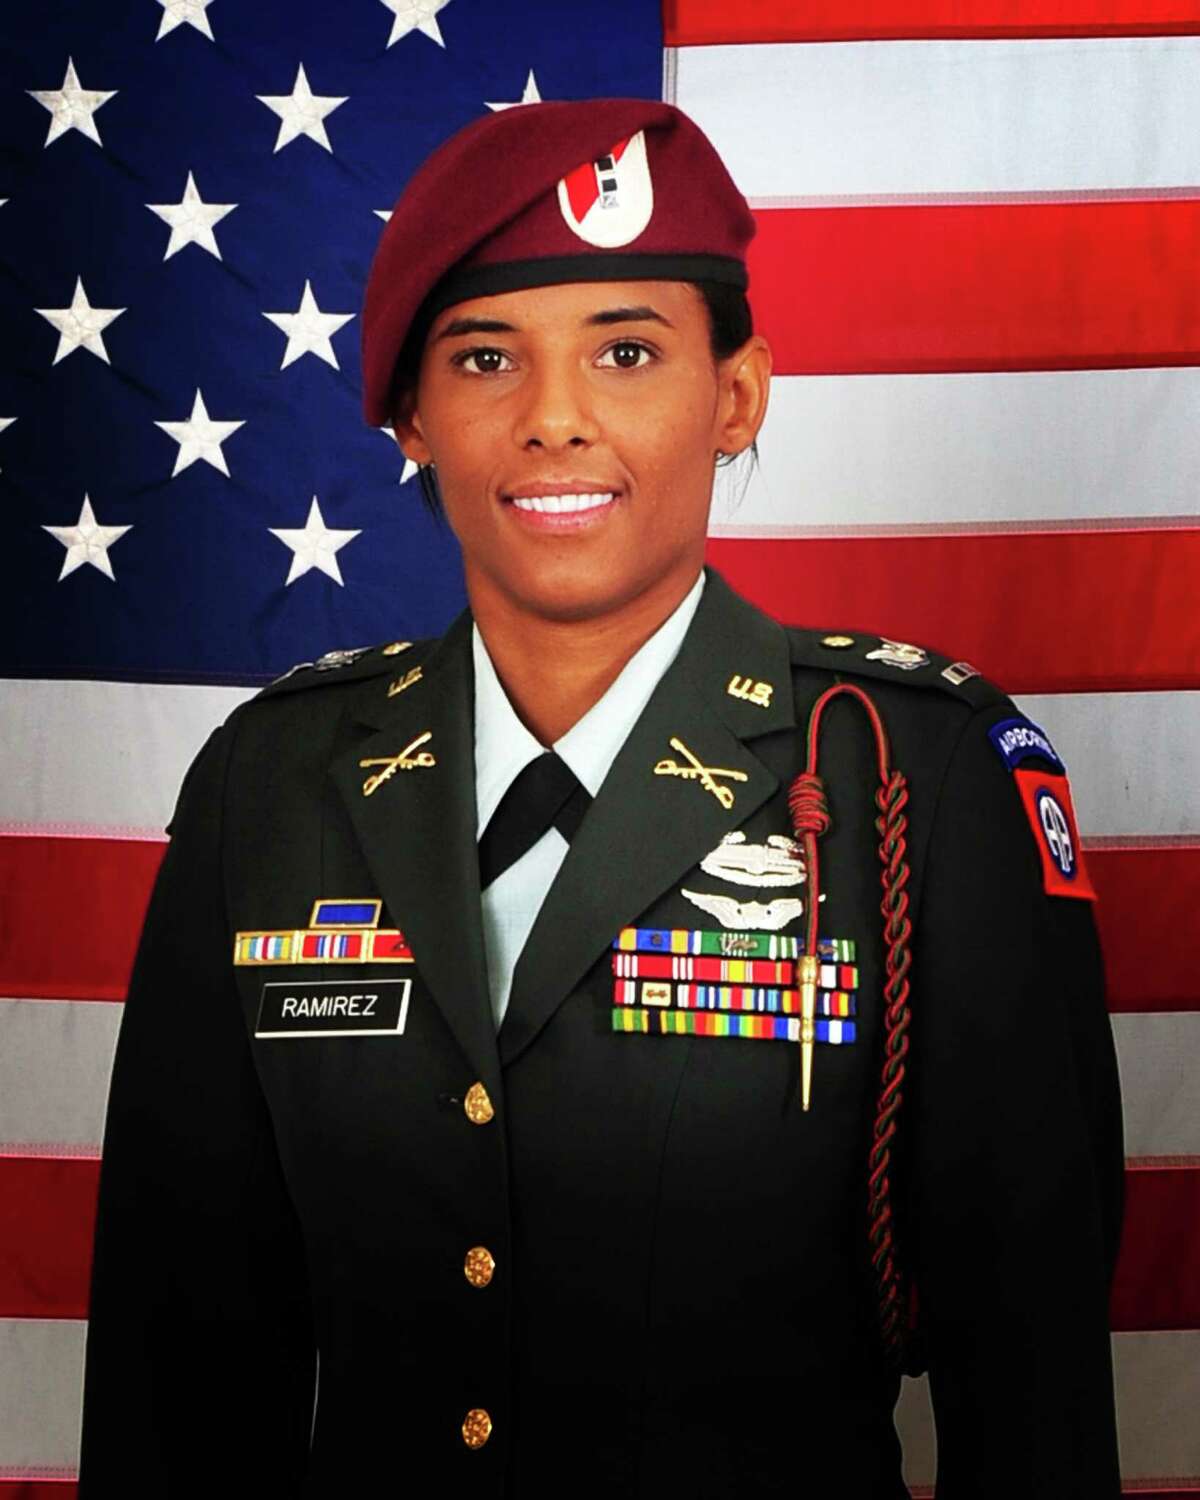 Chief Warrant Officer 2 Thalia Ramirez. Ramirez was killed when her OH-58D Kiowa Warrior helicopter crashed in eastern Afghanistan Sept. 5, 2012. Ramirez was assigned to Troop F, 1-17 Air Cavalry Regiment, 82nd Combat Aviation Brigade, 82nd Airborne Division.